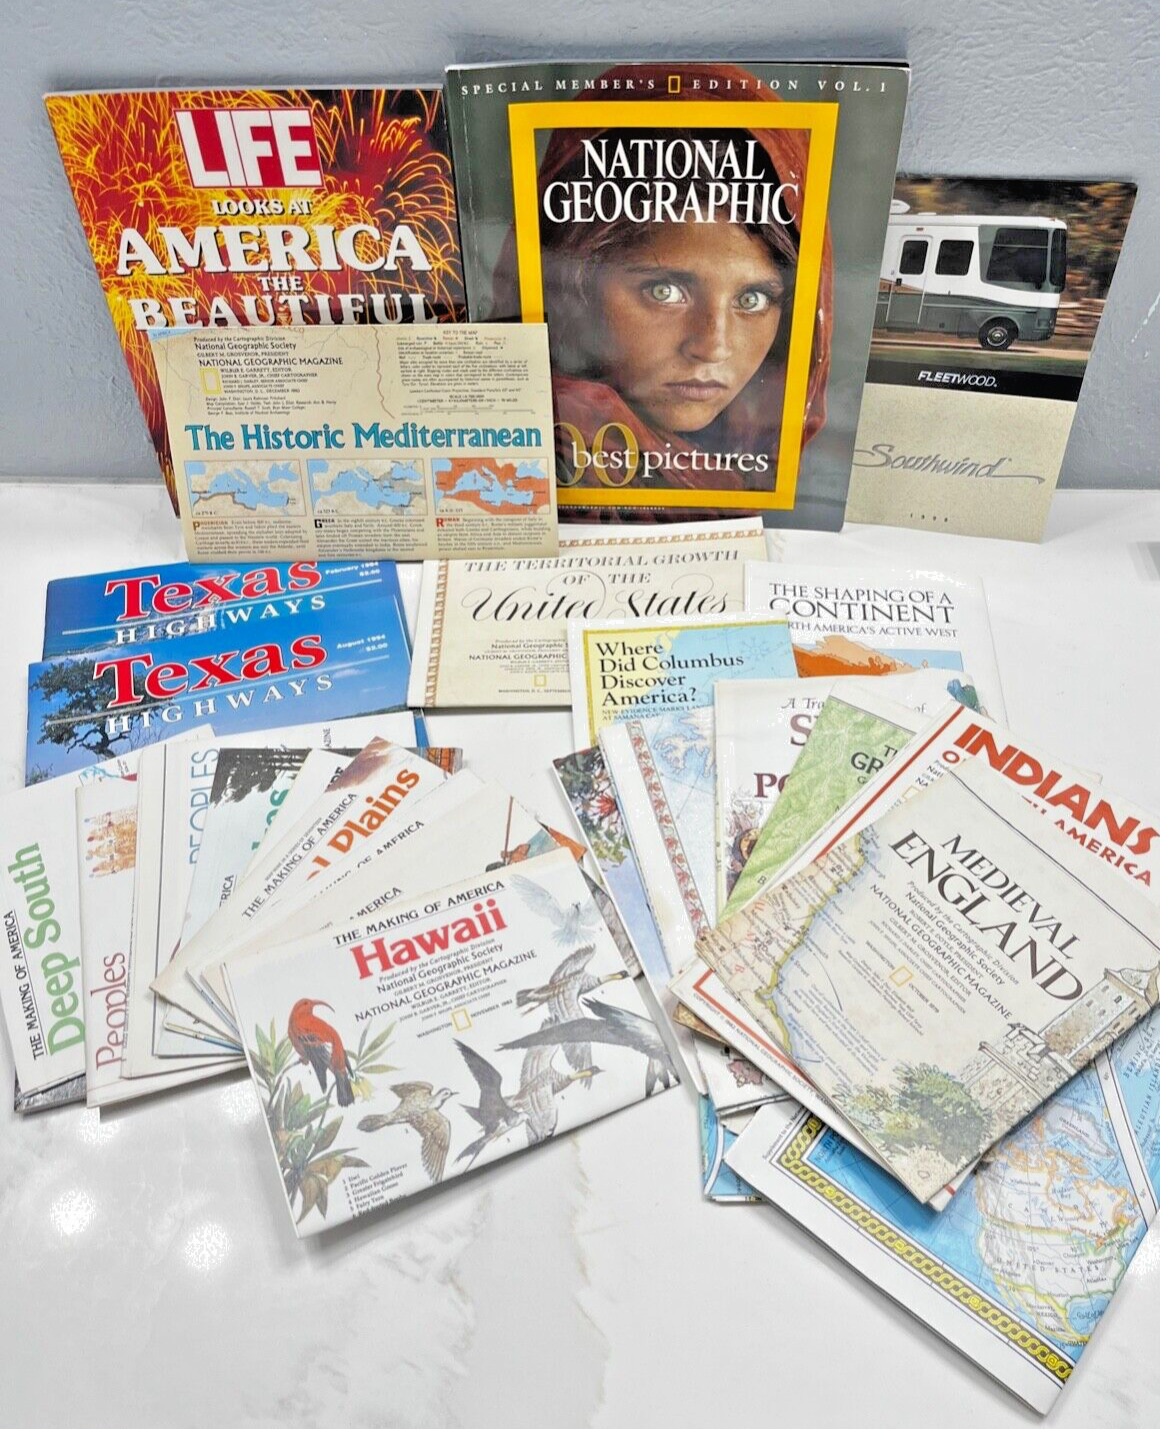 Vintage National Geographic Maps, Texas Highways, Magazines - Lot of 20+